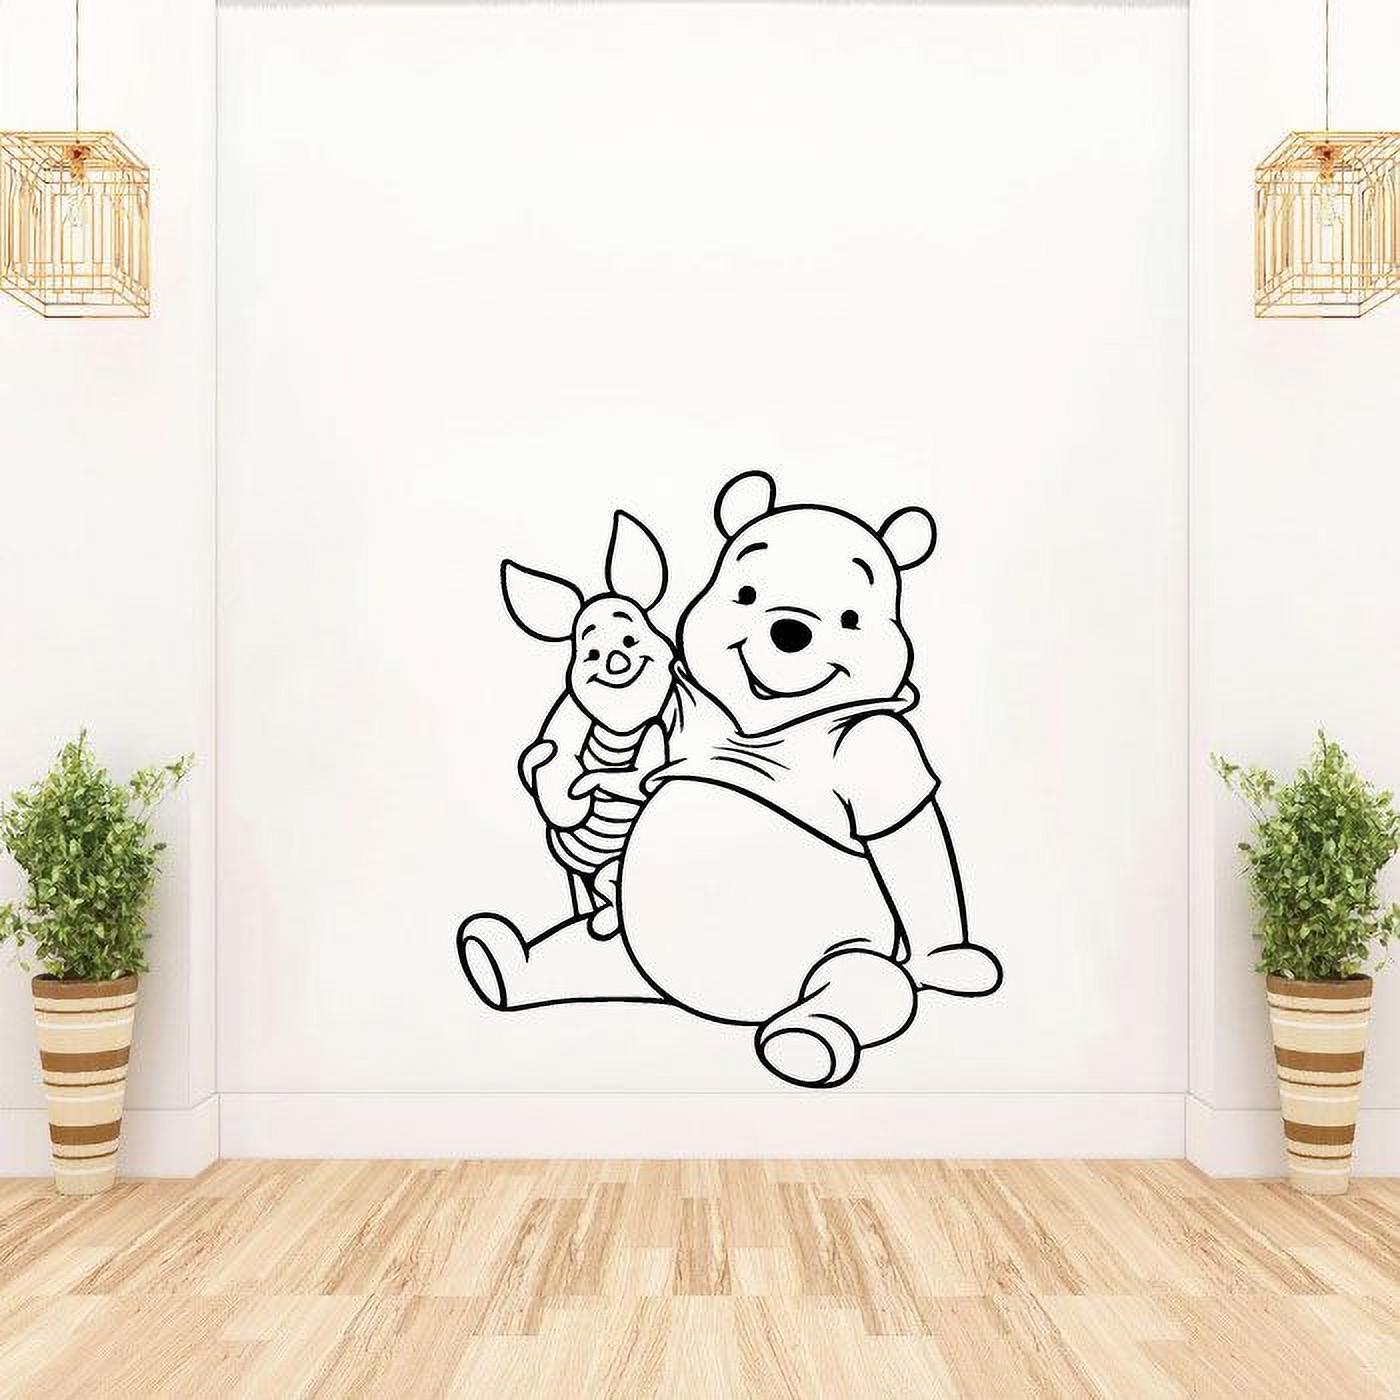 Winnie The Pooh Pooh Bear Pooh Adventures Cute Winnie And Piglet Silhouette Vinyl Sticker Wall Art Decoration Decal For Kids Baby Girl Baby Boy Room Home Room Wall Sticker Decoration Size (8x10 inch) - image 1 of 3